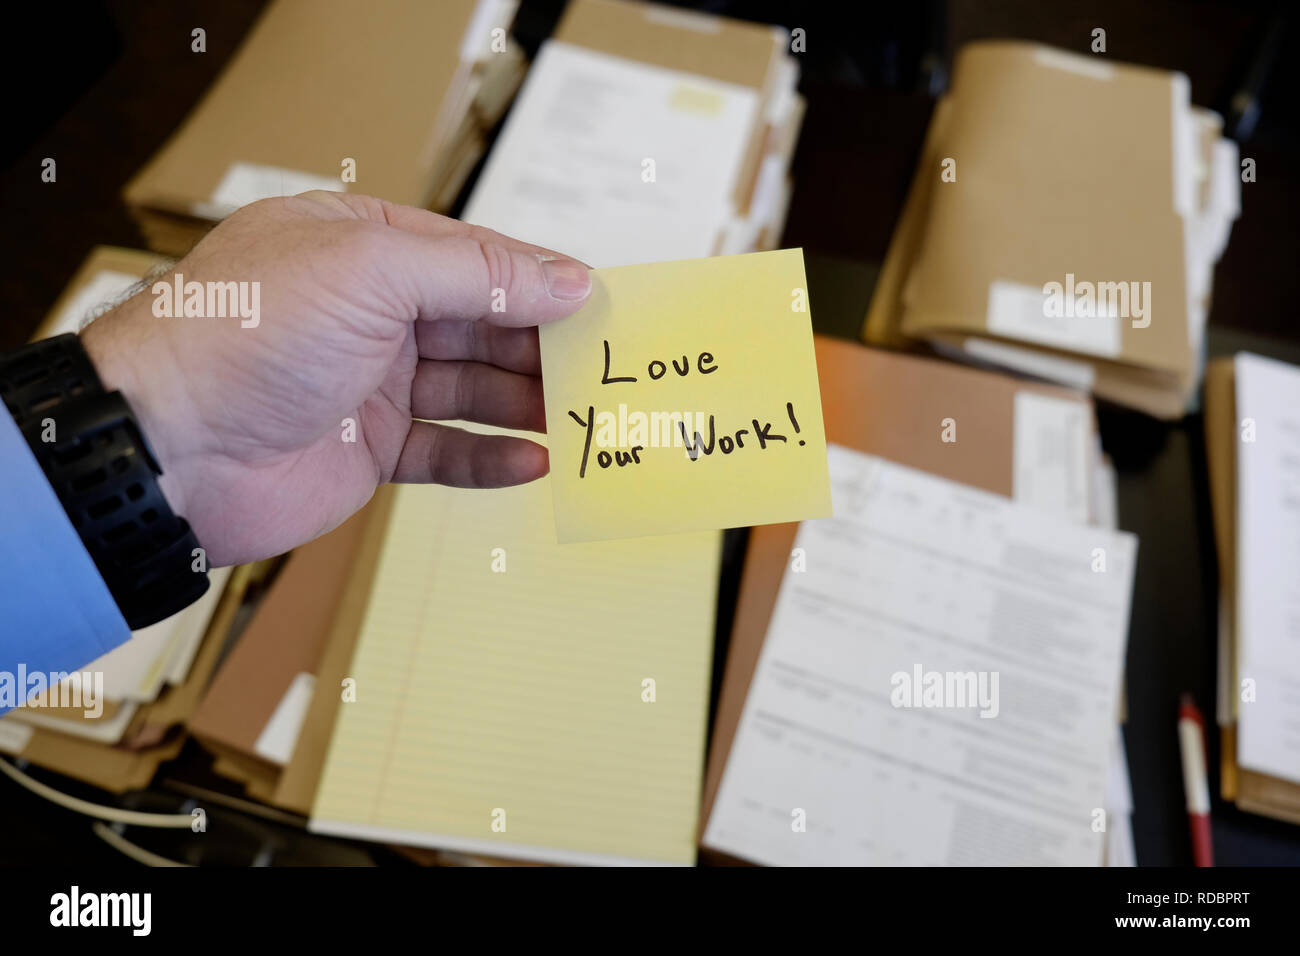 Sticky Note in Hand Businessman Desk Files Folder Working Message Motivation Love Your Work Stock Photo